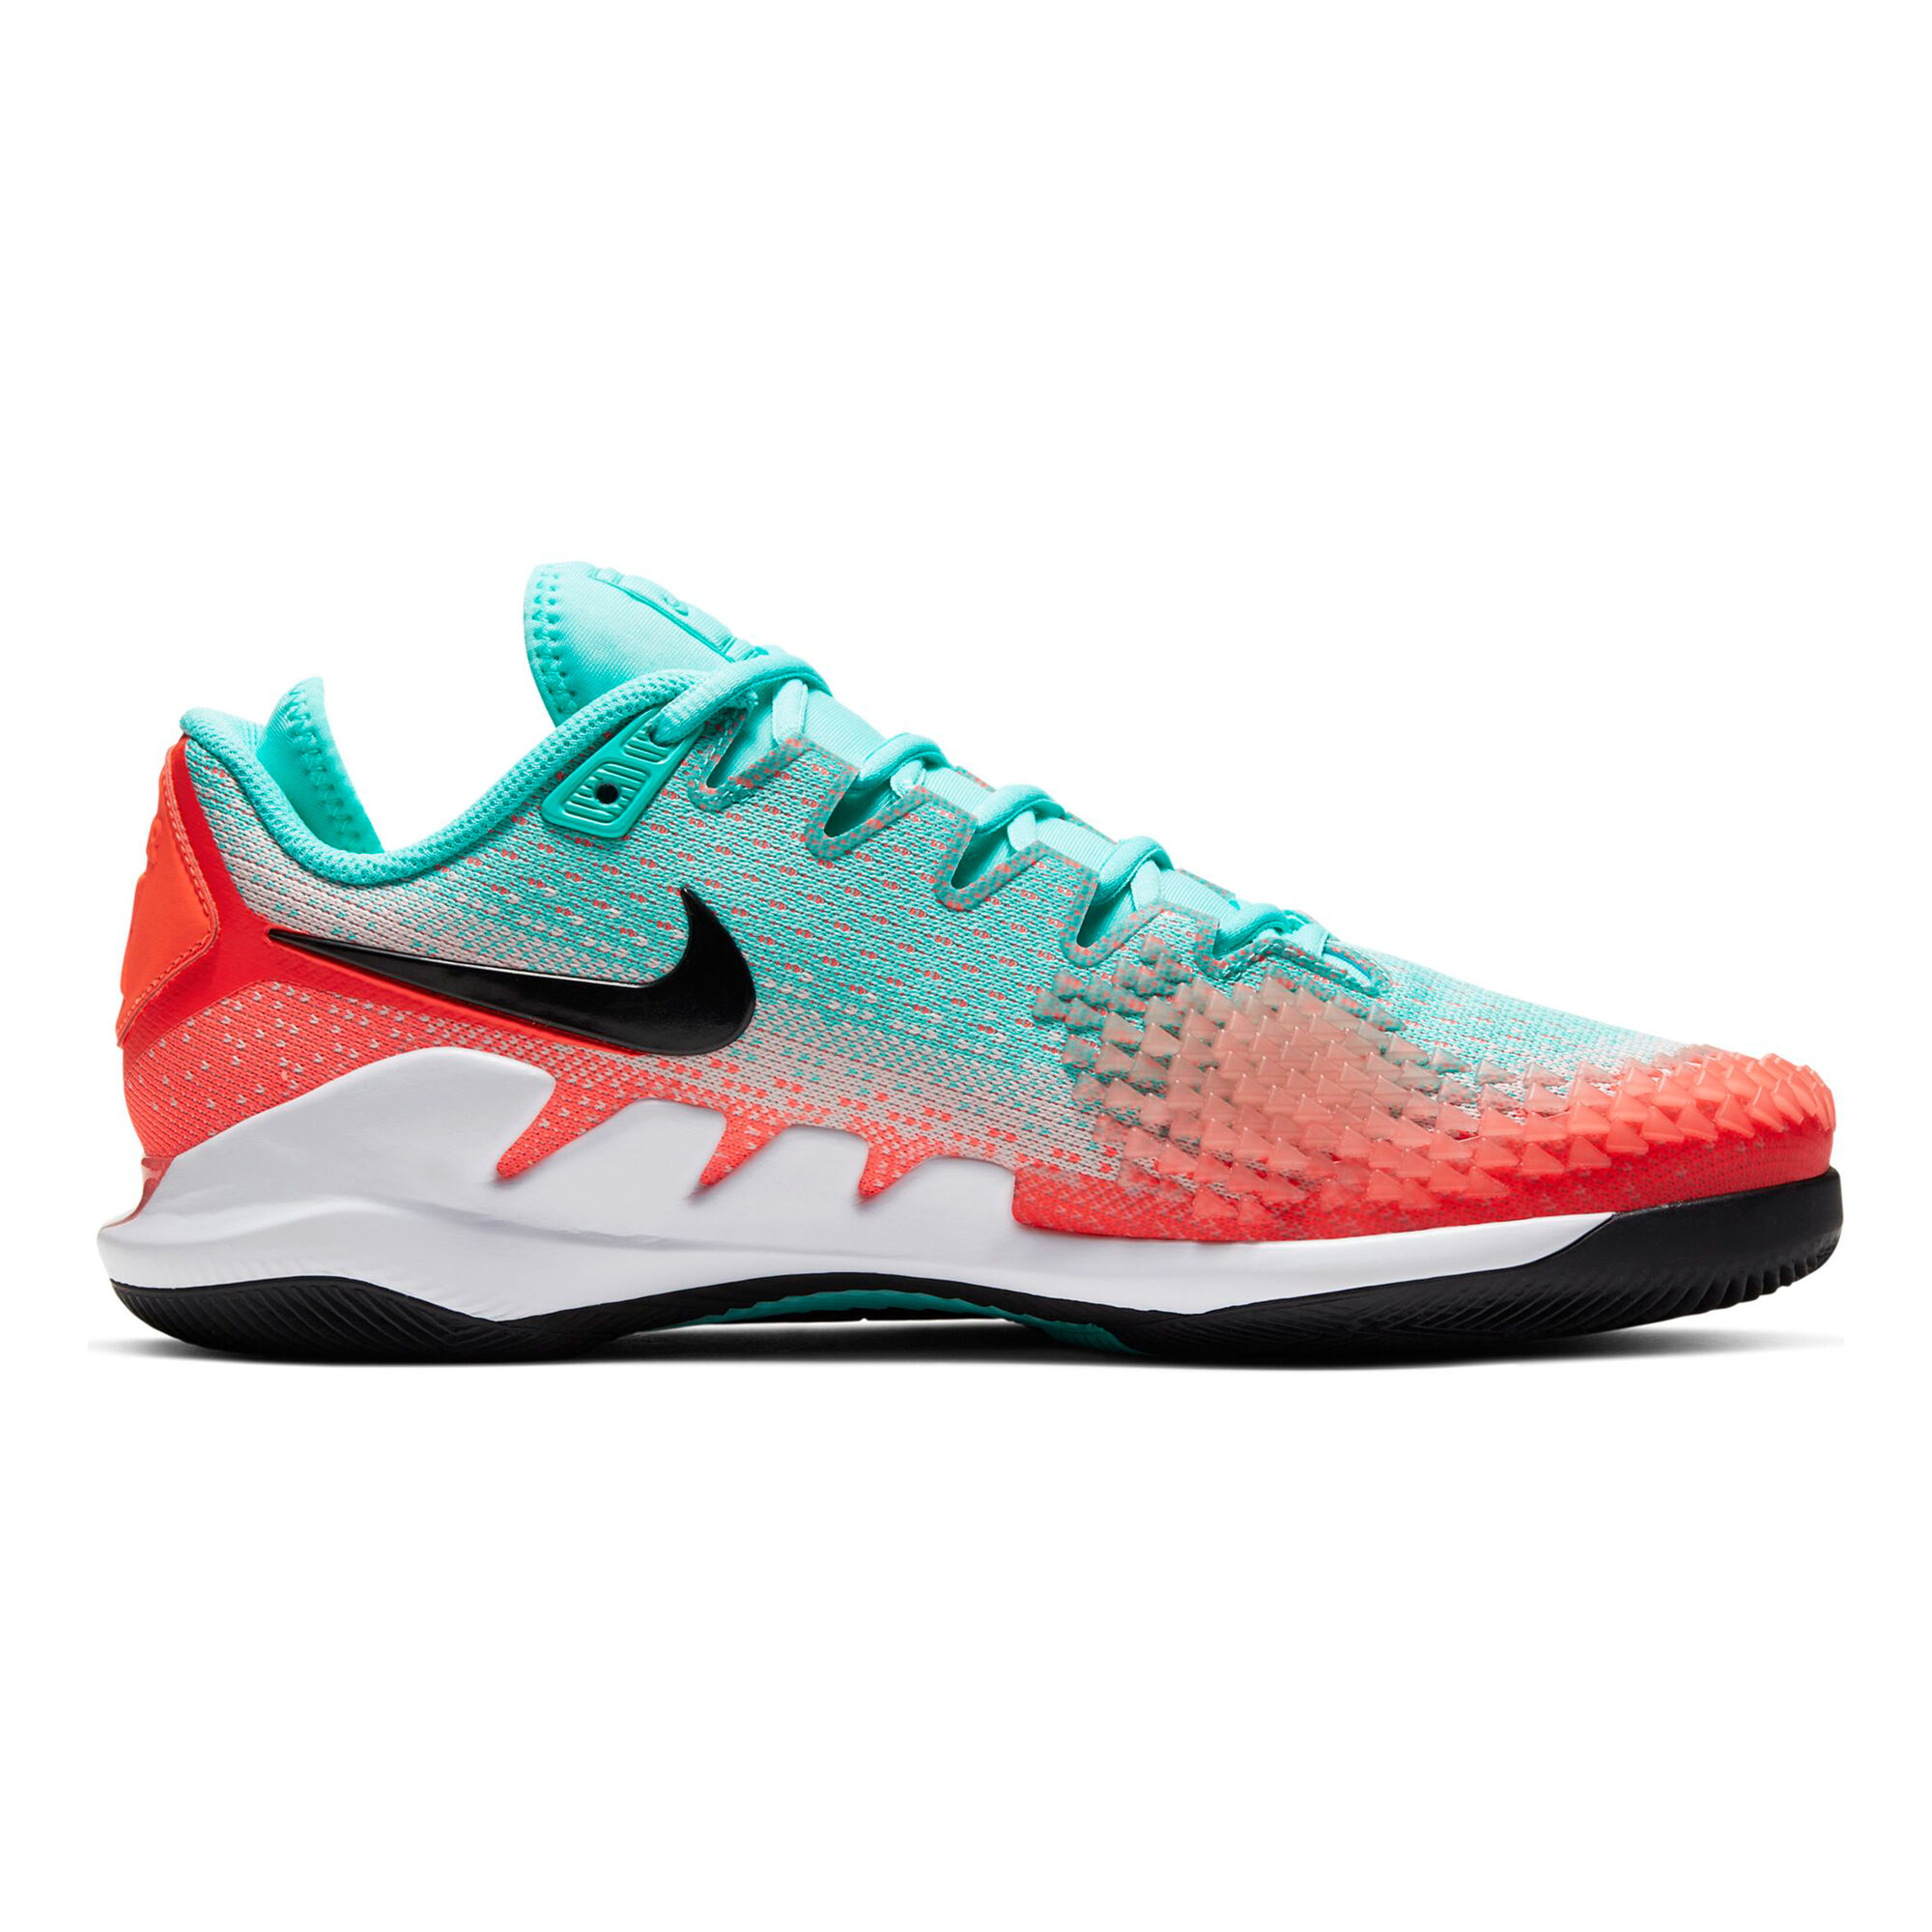 buy Nike Air Vapor X Knit All Shoe Men - Turquoise, Coral | Tennis-Point